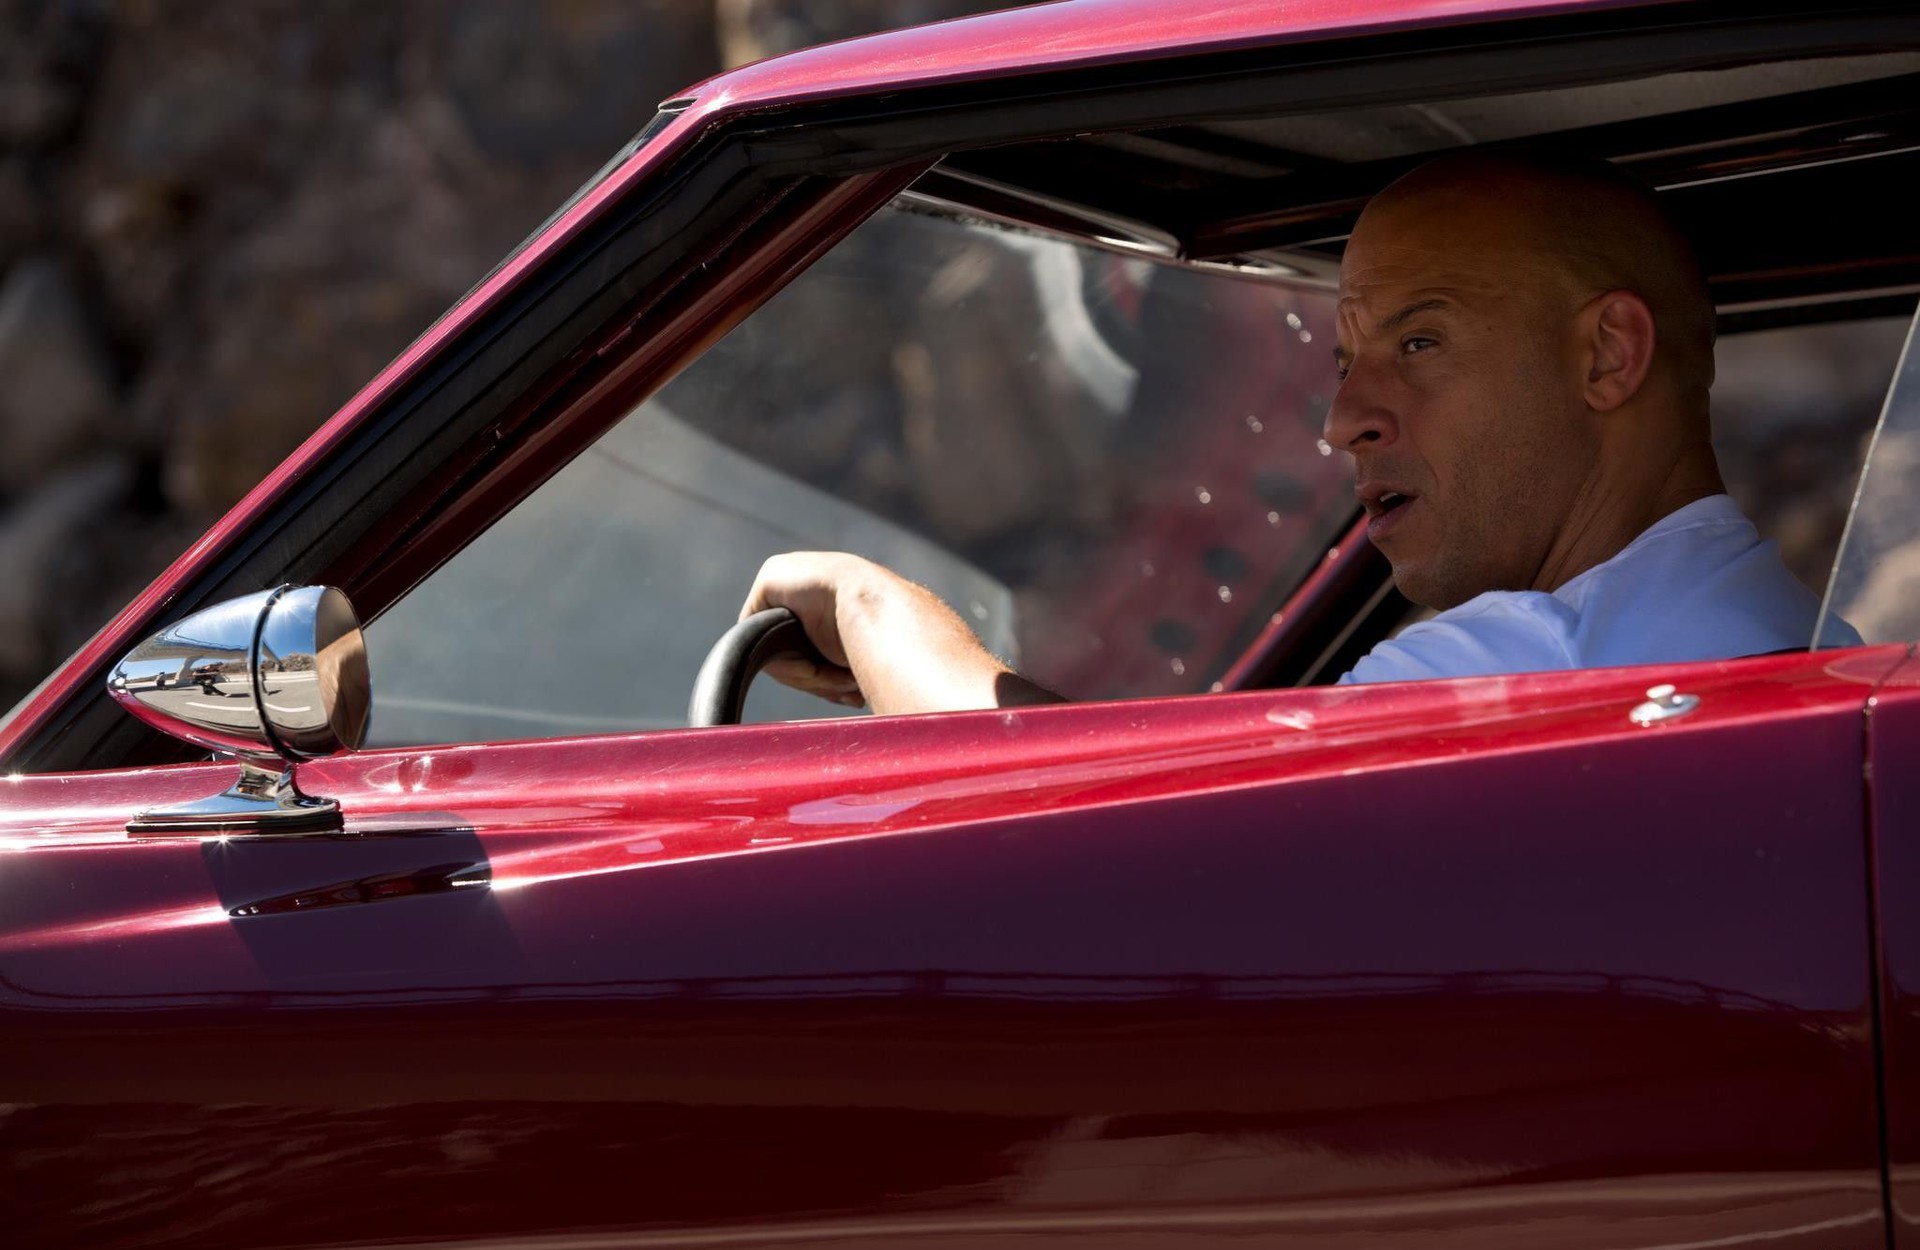 Vin Diesel Photo: Vin Diesel as Dom Toretto in Fast and Furious 6.